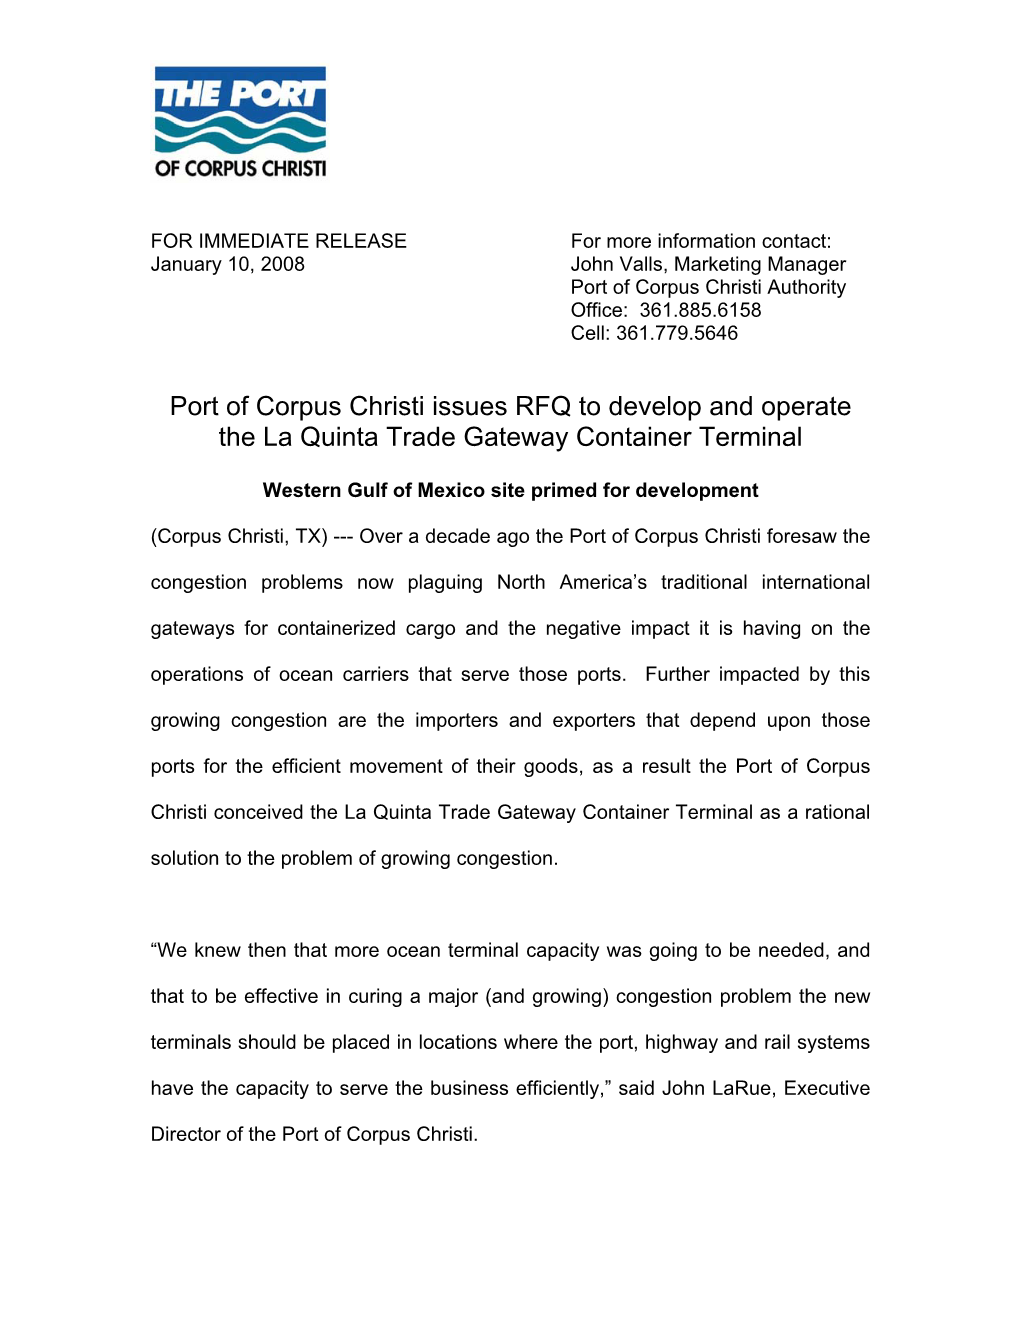 Port of Corpus Christi Issues RFQ to Develop and Operate the La Quinta Trade Gateway Container Terminal